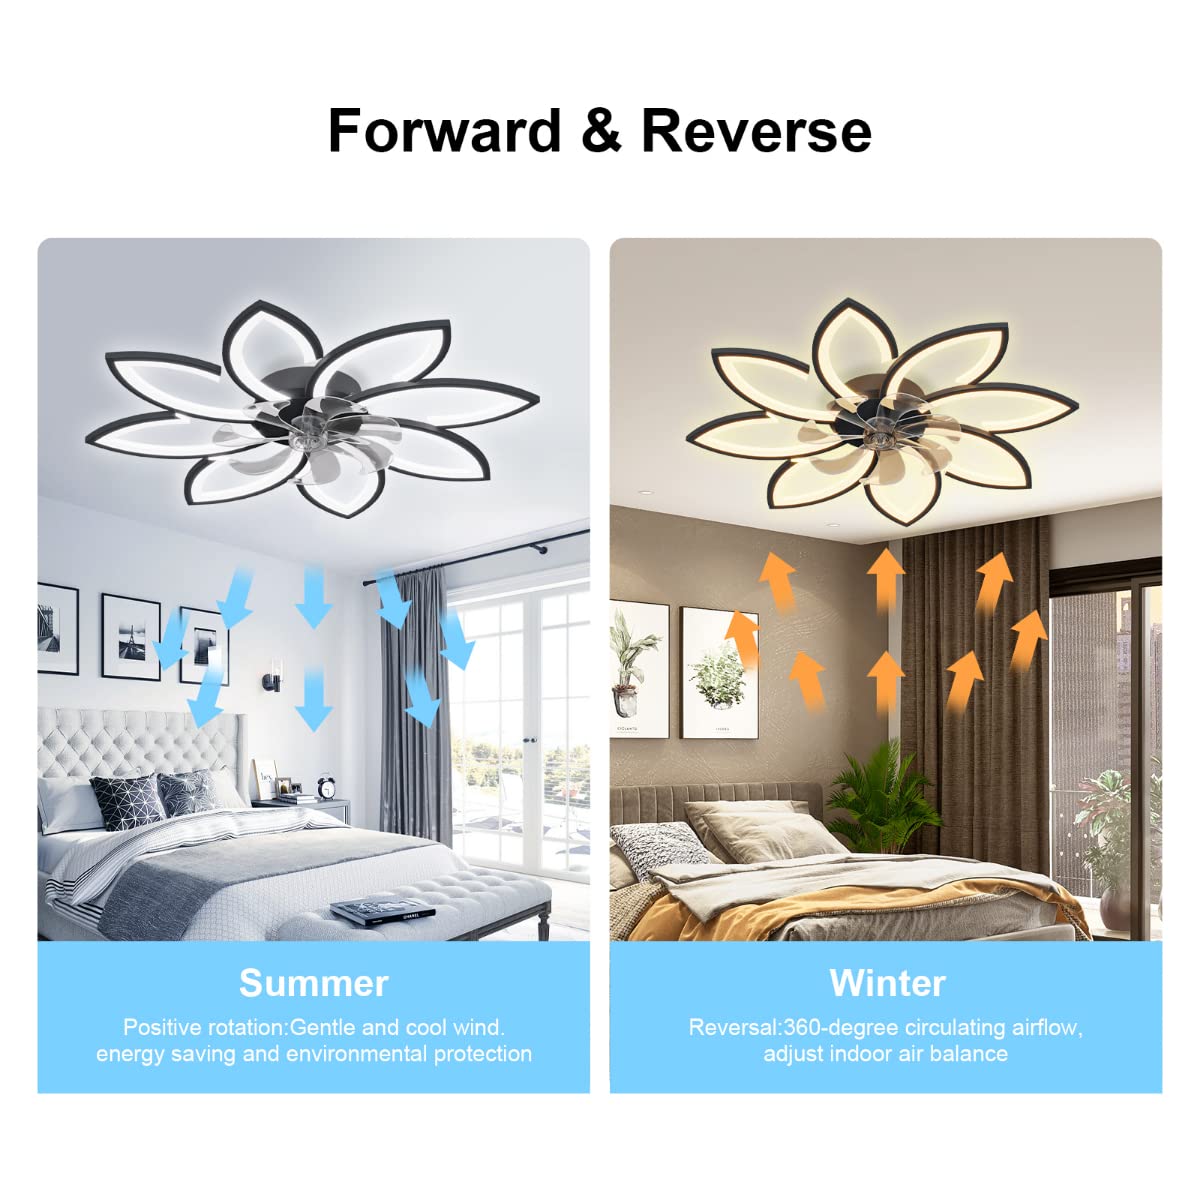 35''Ceiling Fans with Lights, Modern Ceiling Fan with Lights and Remote, Dimmable Bladeless Ceiling Fans LED Light, Low Profile Ceiling Fan 6 Speed Reversible Blades Timing, for Bedroom (Black)